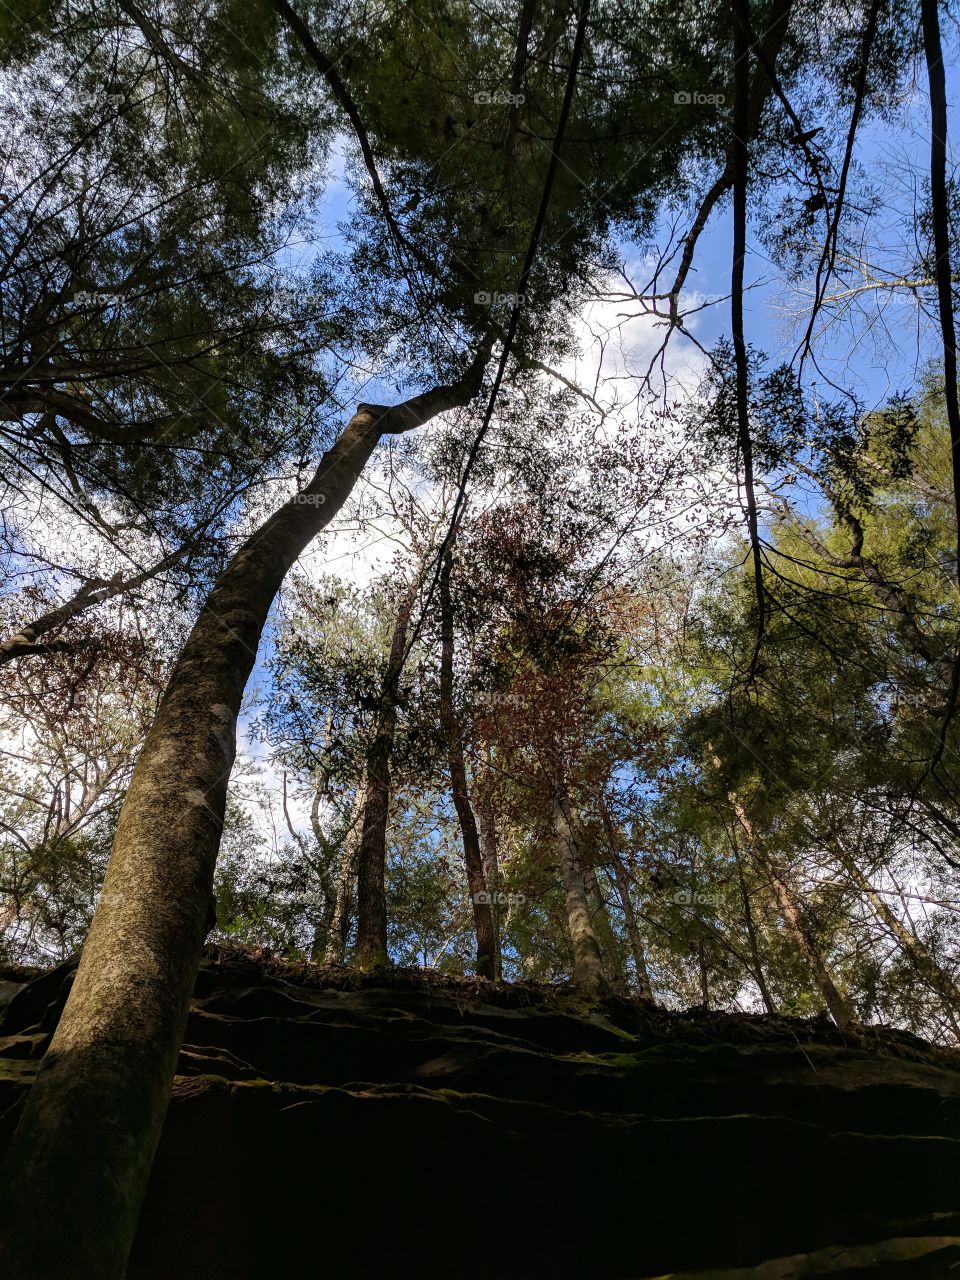 looking up in the forest